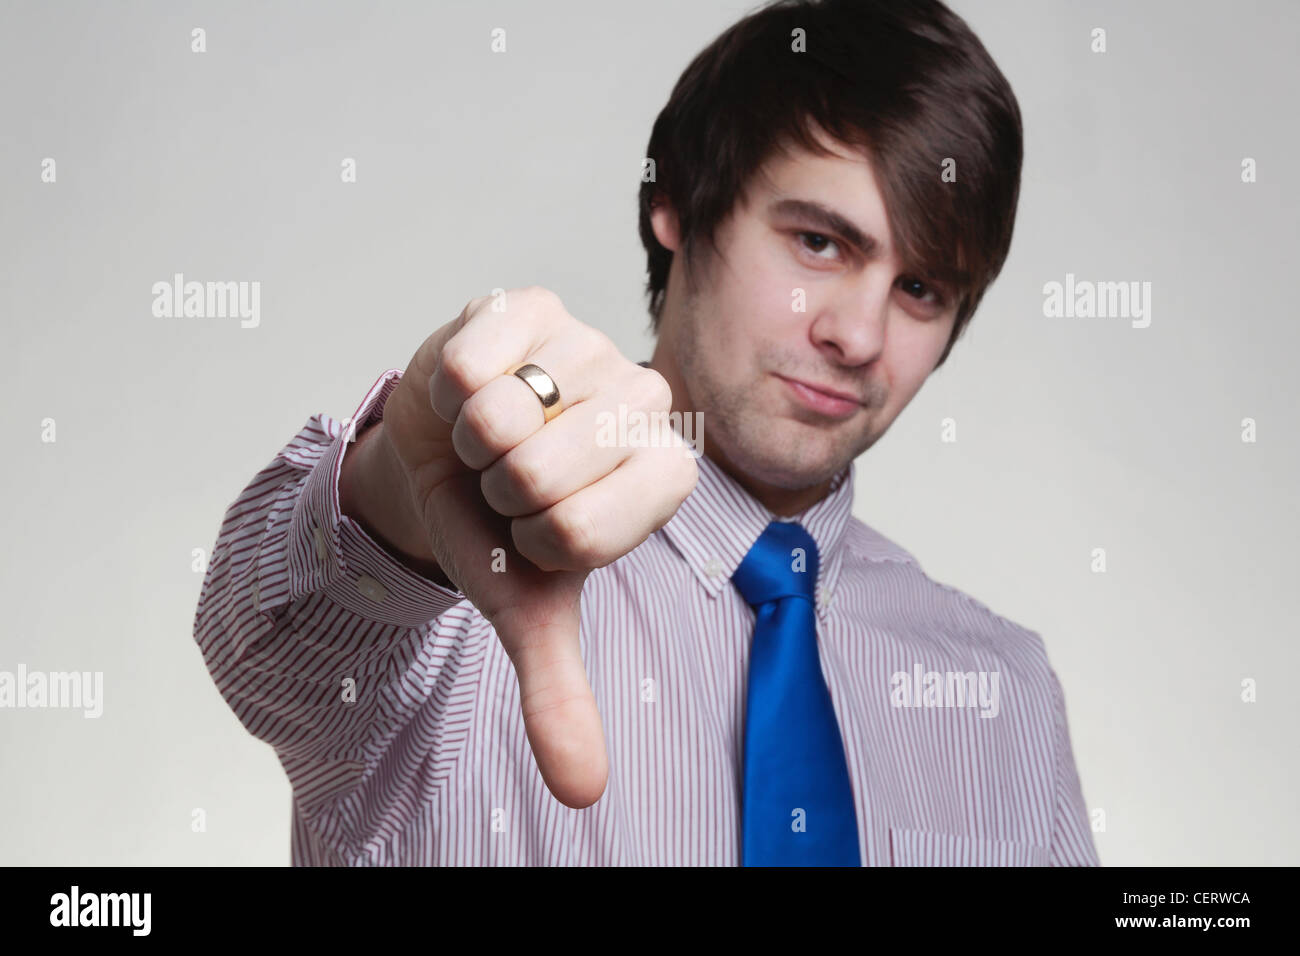 business looking man in a shirt and tie doing hand gestures, thumbs dowm Stock Photo